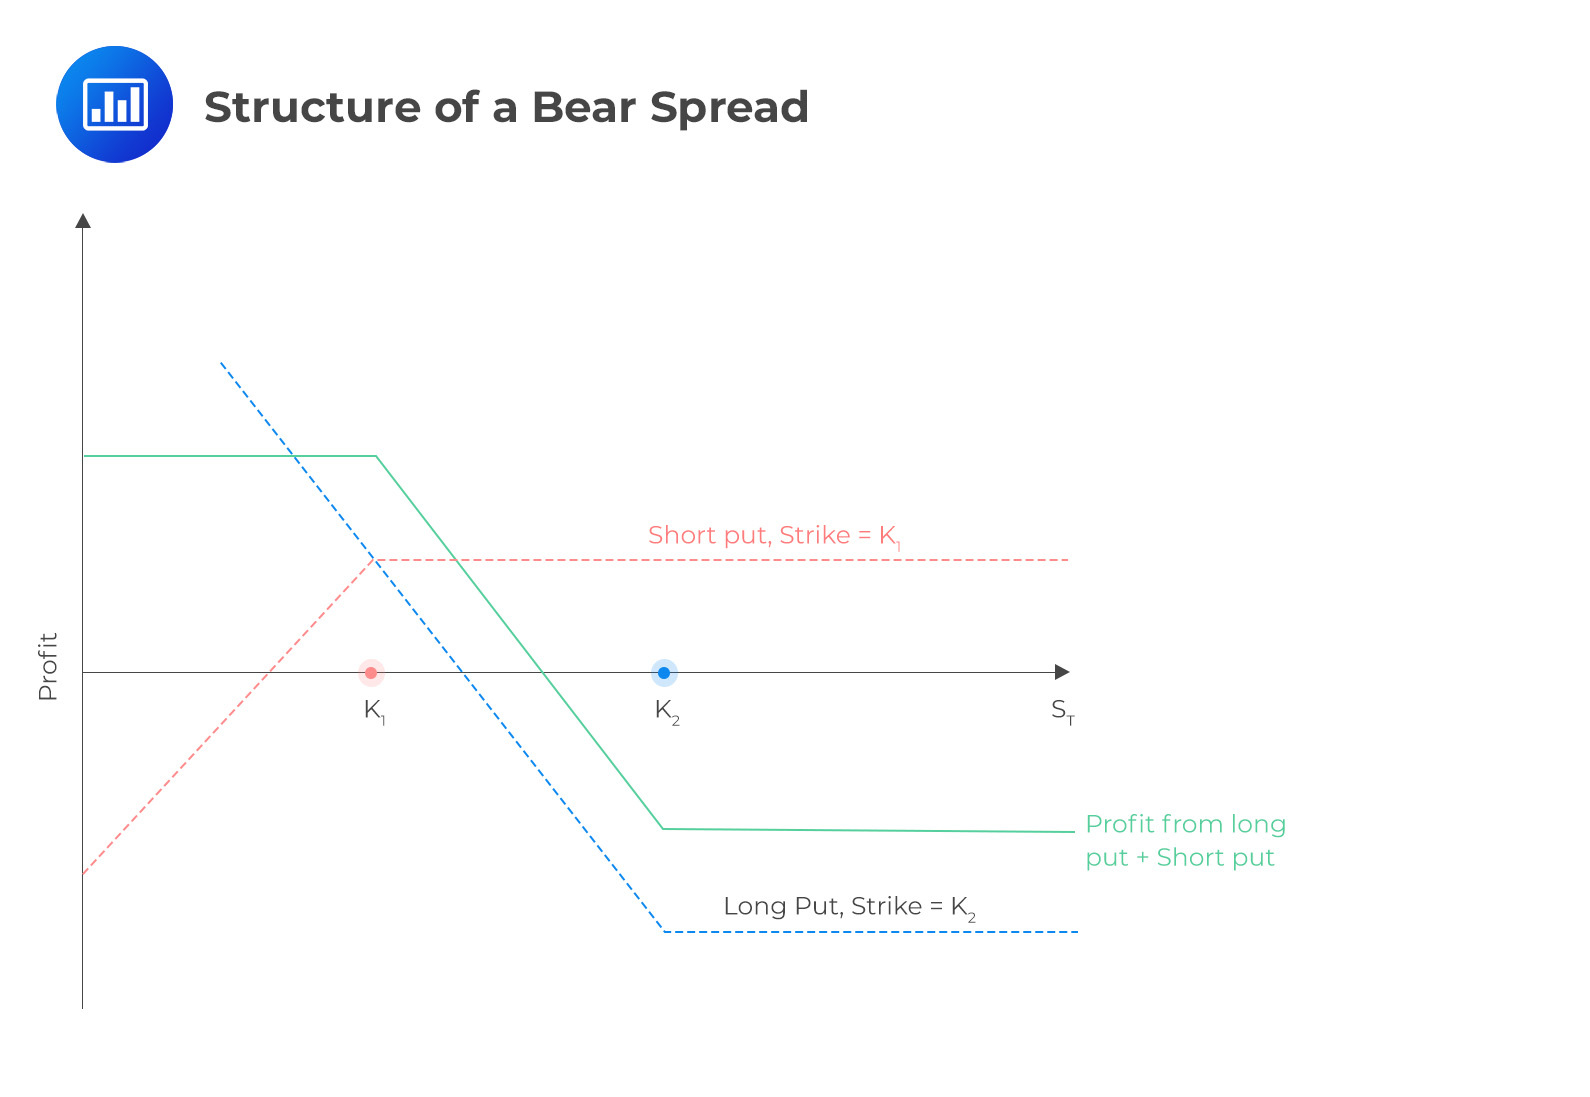 Structure of a bear spread